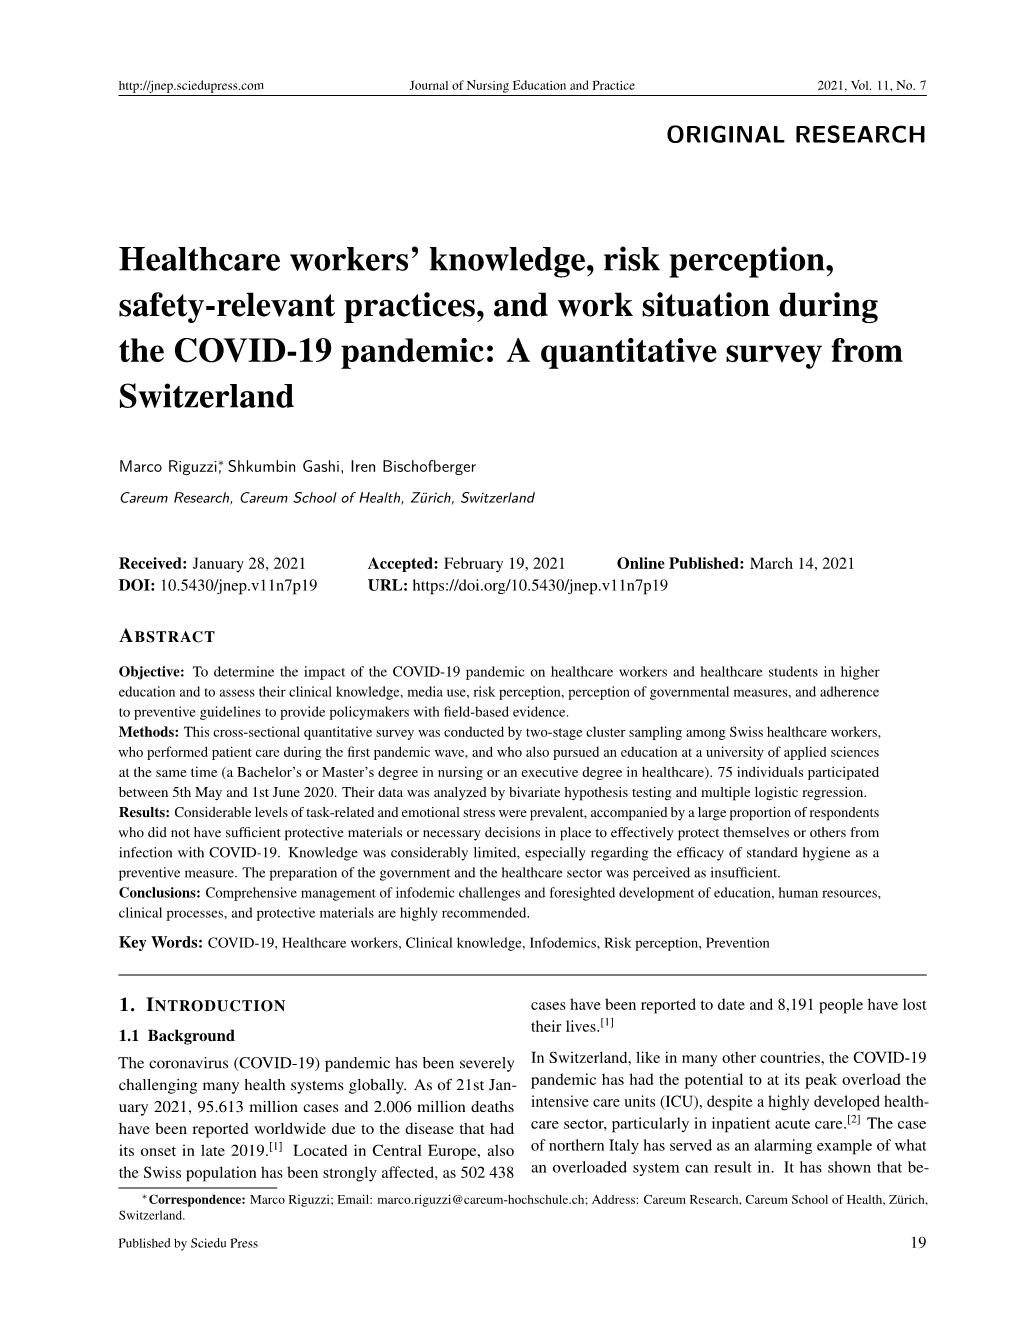 Healthcare Workers' Knowledge, Risk Perception, Safety-Relevant